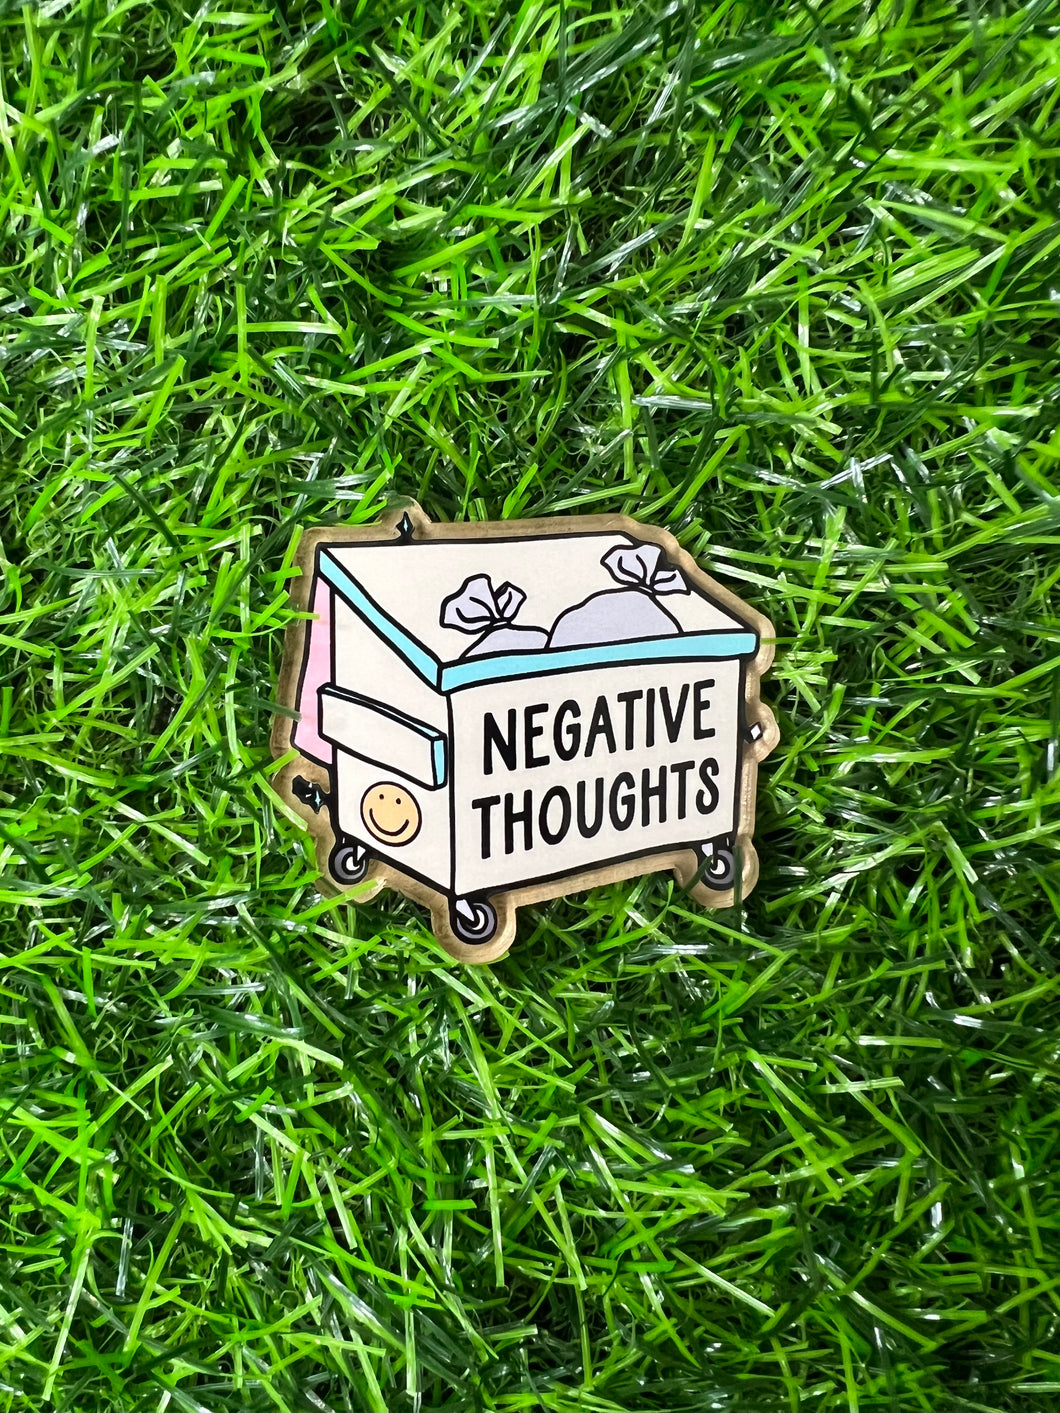 Negative Thoughts Dumpster Acrylic Blank & Decal Set